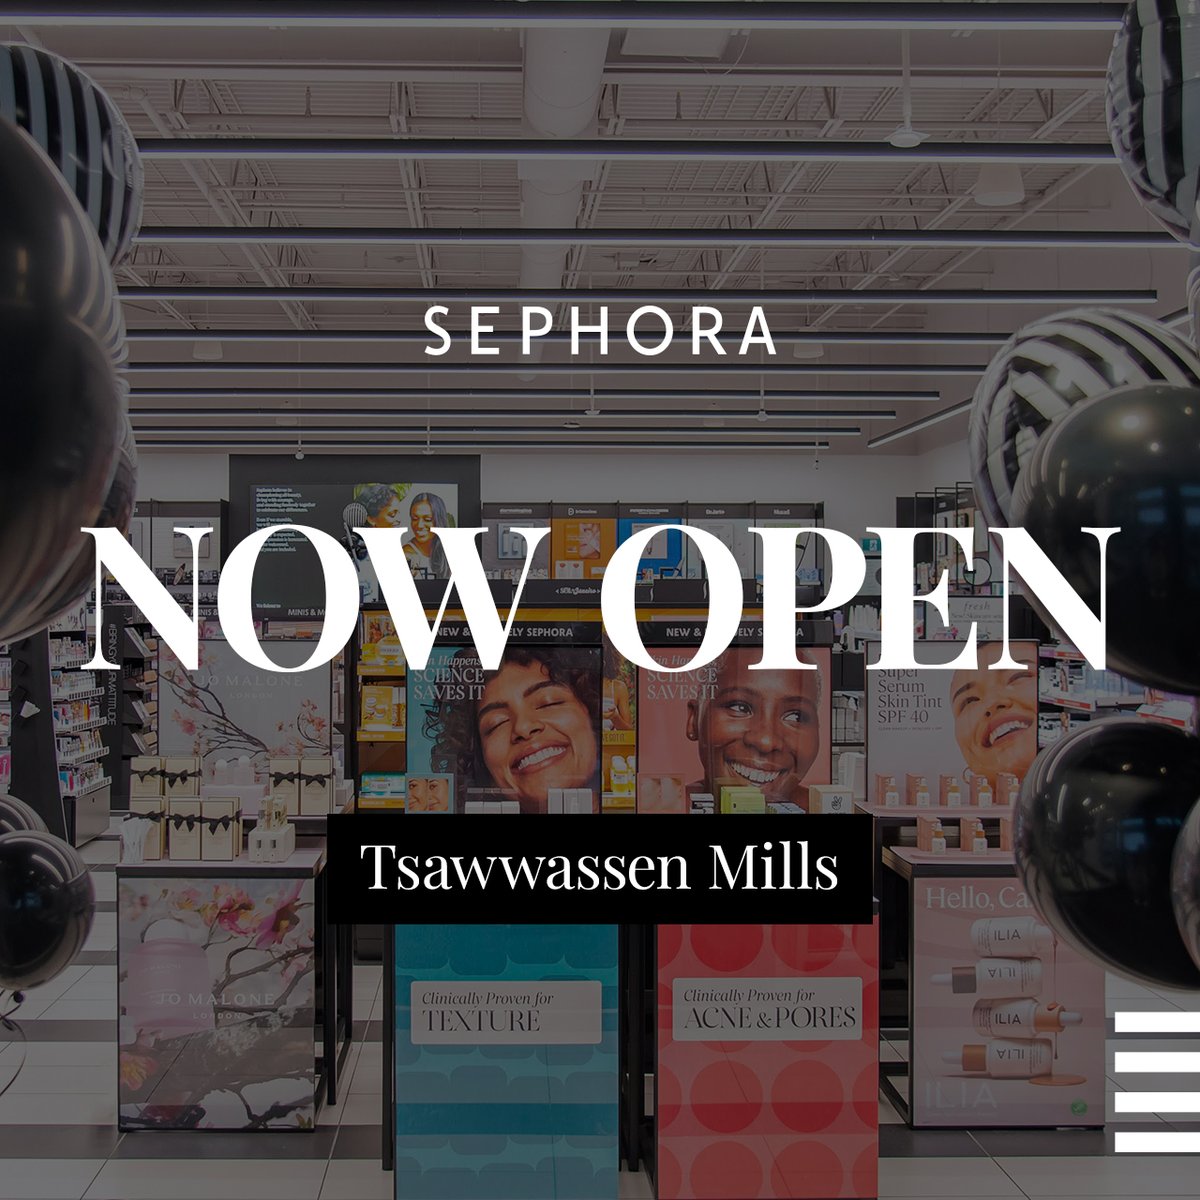 Beauty enthusiasts, rejoice! 🎉✨ We're thrilled to announce the grand opening of Sephora at Tsawwassen Mills! Come explore a world of glamour, innovation, and endless beauty possibilities. Join us as we celebrate this exciting milestone in style! 💄💅